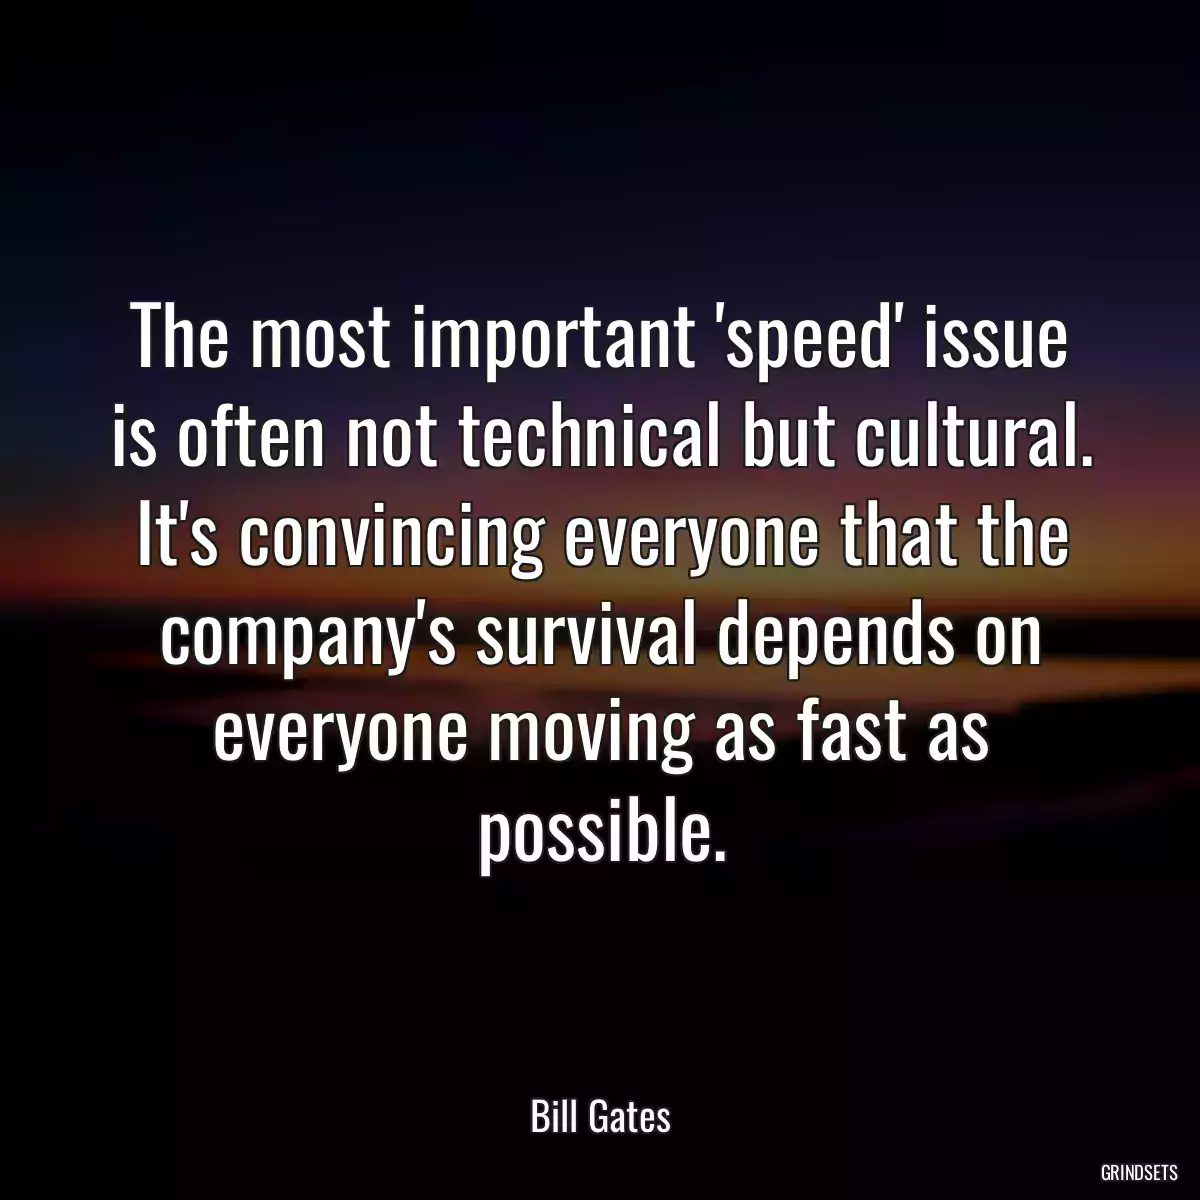 The most important \'speed\' issue is often not technical but cultural. It\'s convincing everyone that the company\'s survival depends on everyone moving as fast as possible.